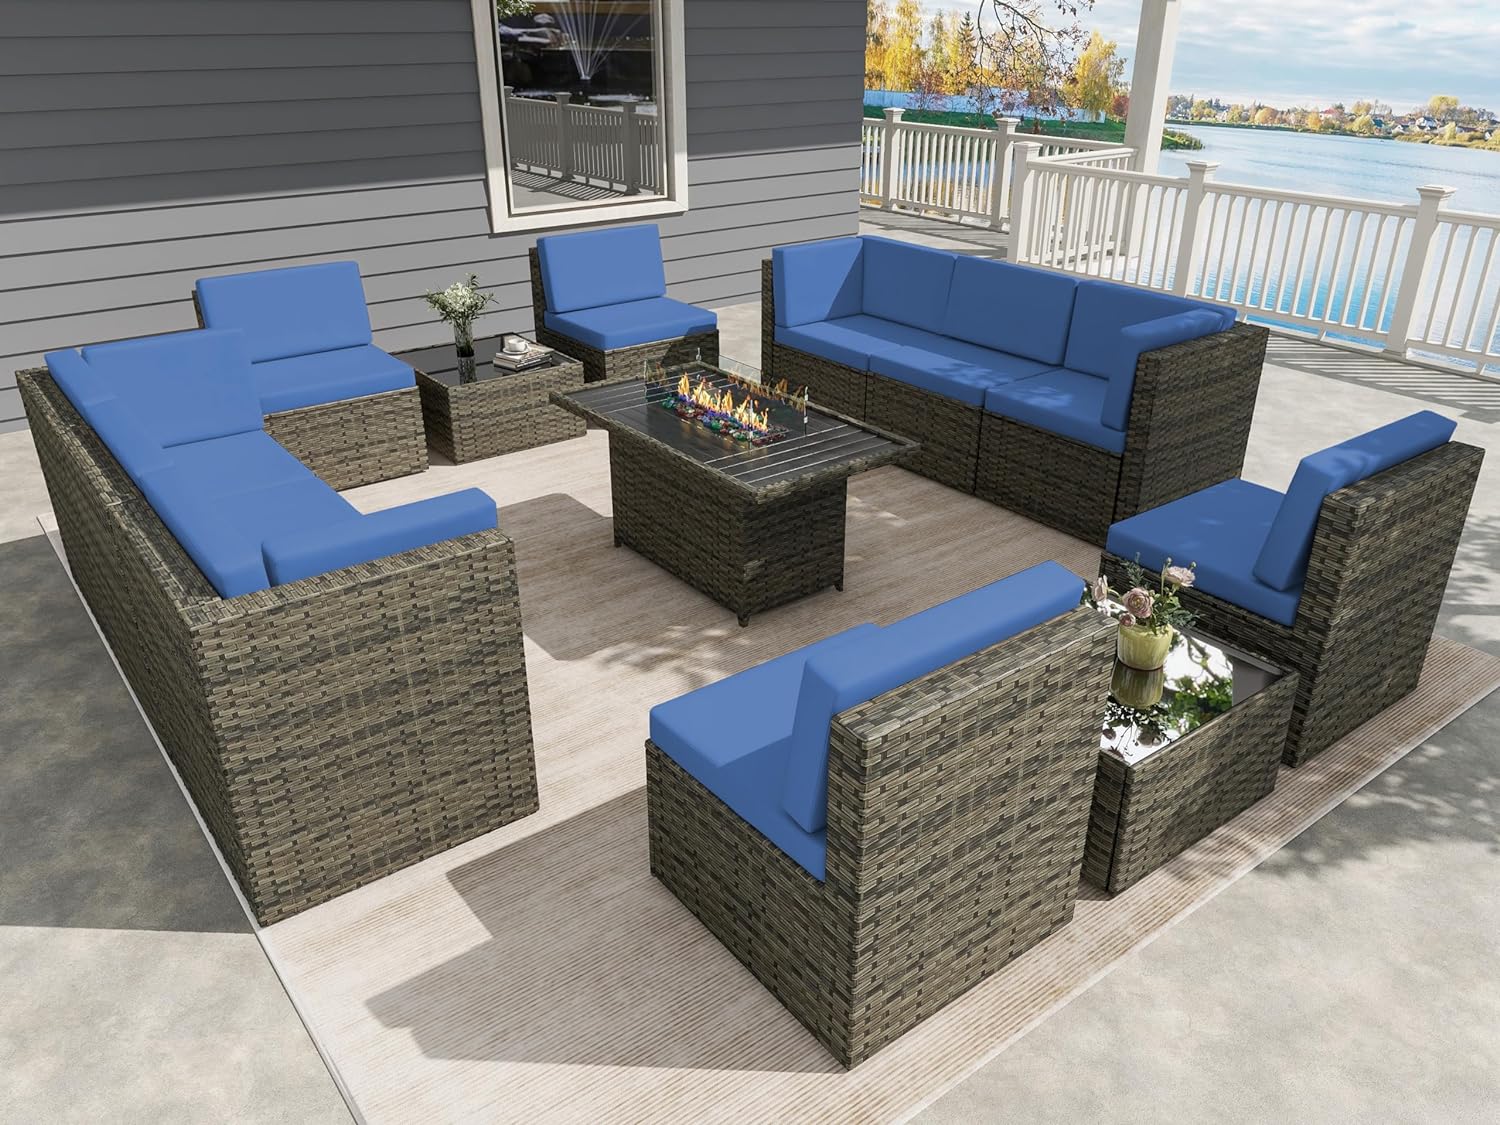 UIXE Outdoor Patio Furniture Sets with Propane Fire Pit Table, 13 Pieces Wicker Patio Sectional Sofa Lounge Couch Seating PE Rattan Conversation Set Includes 45" Gas Fire Table, Navy Blue